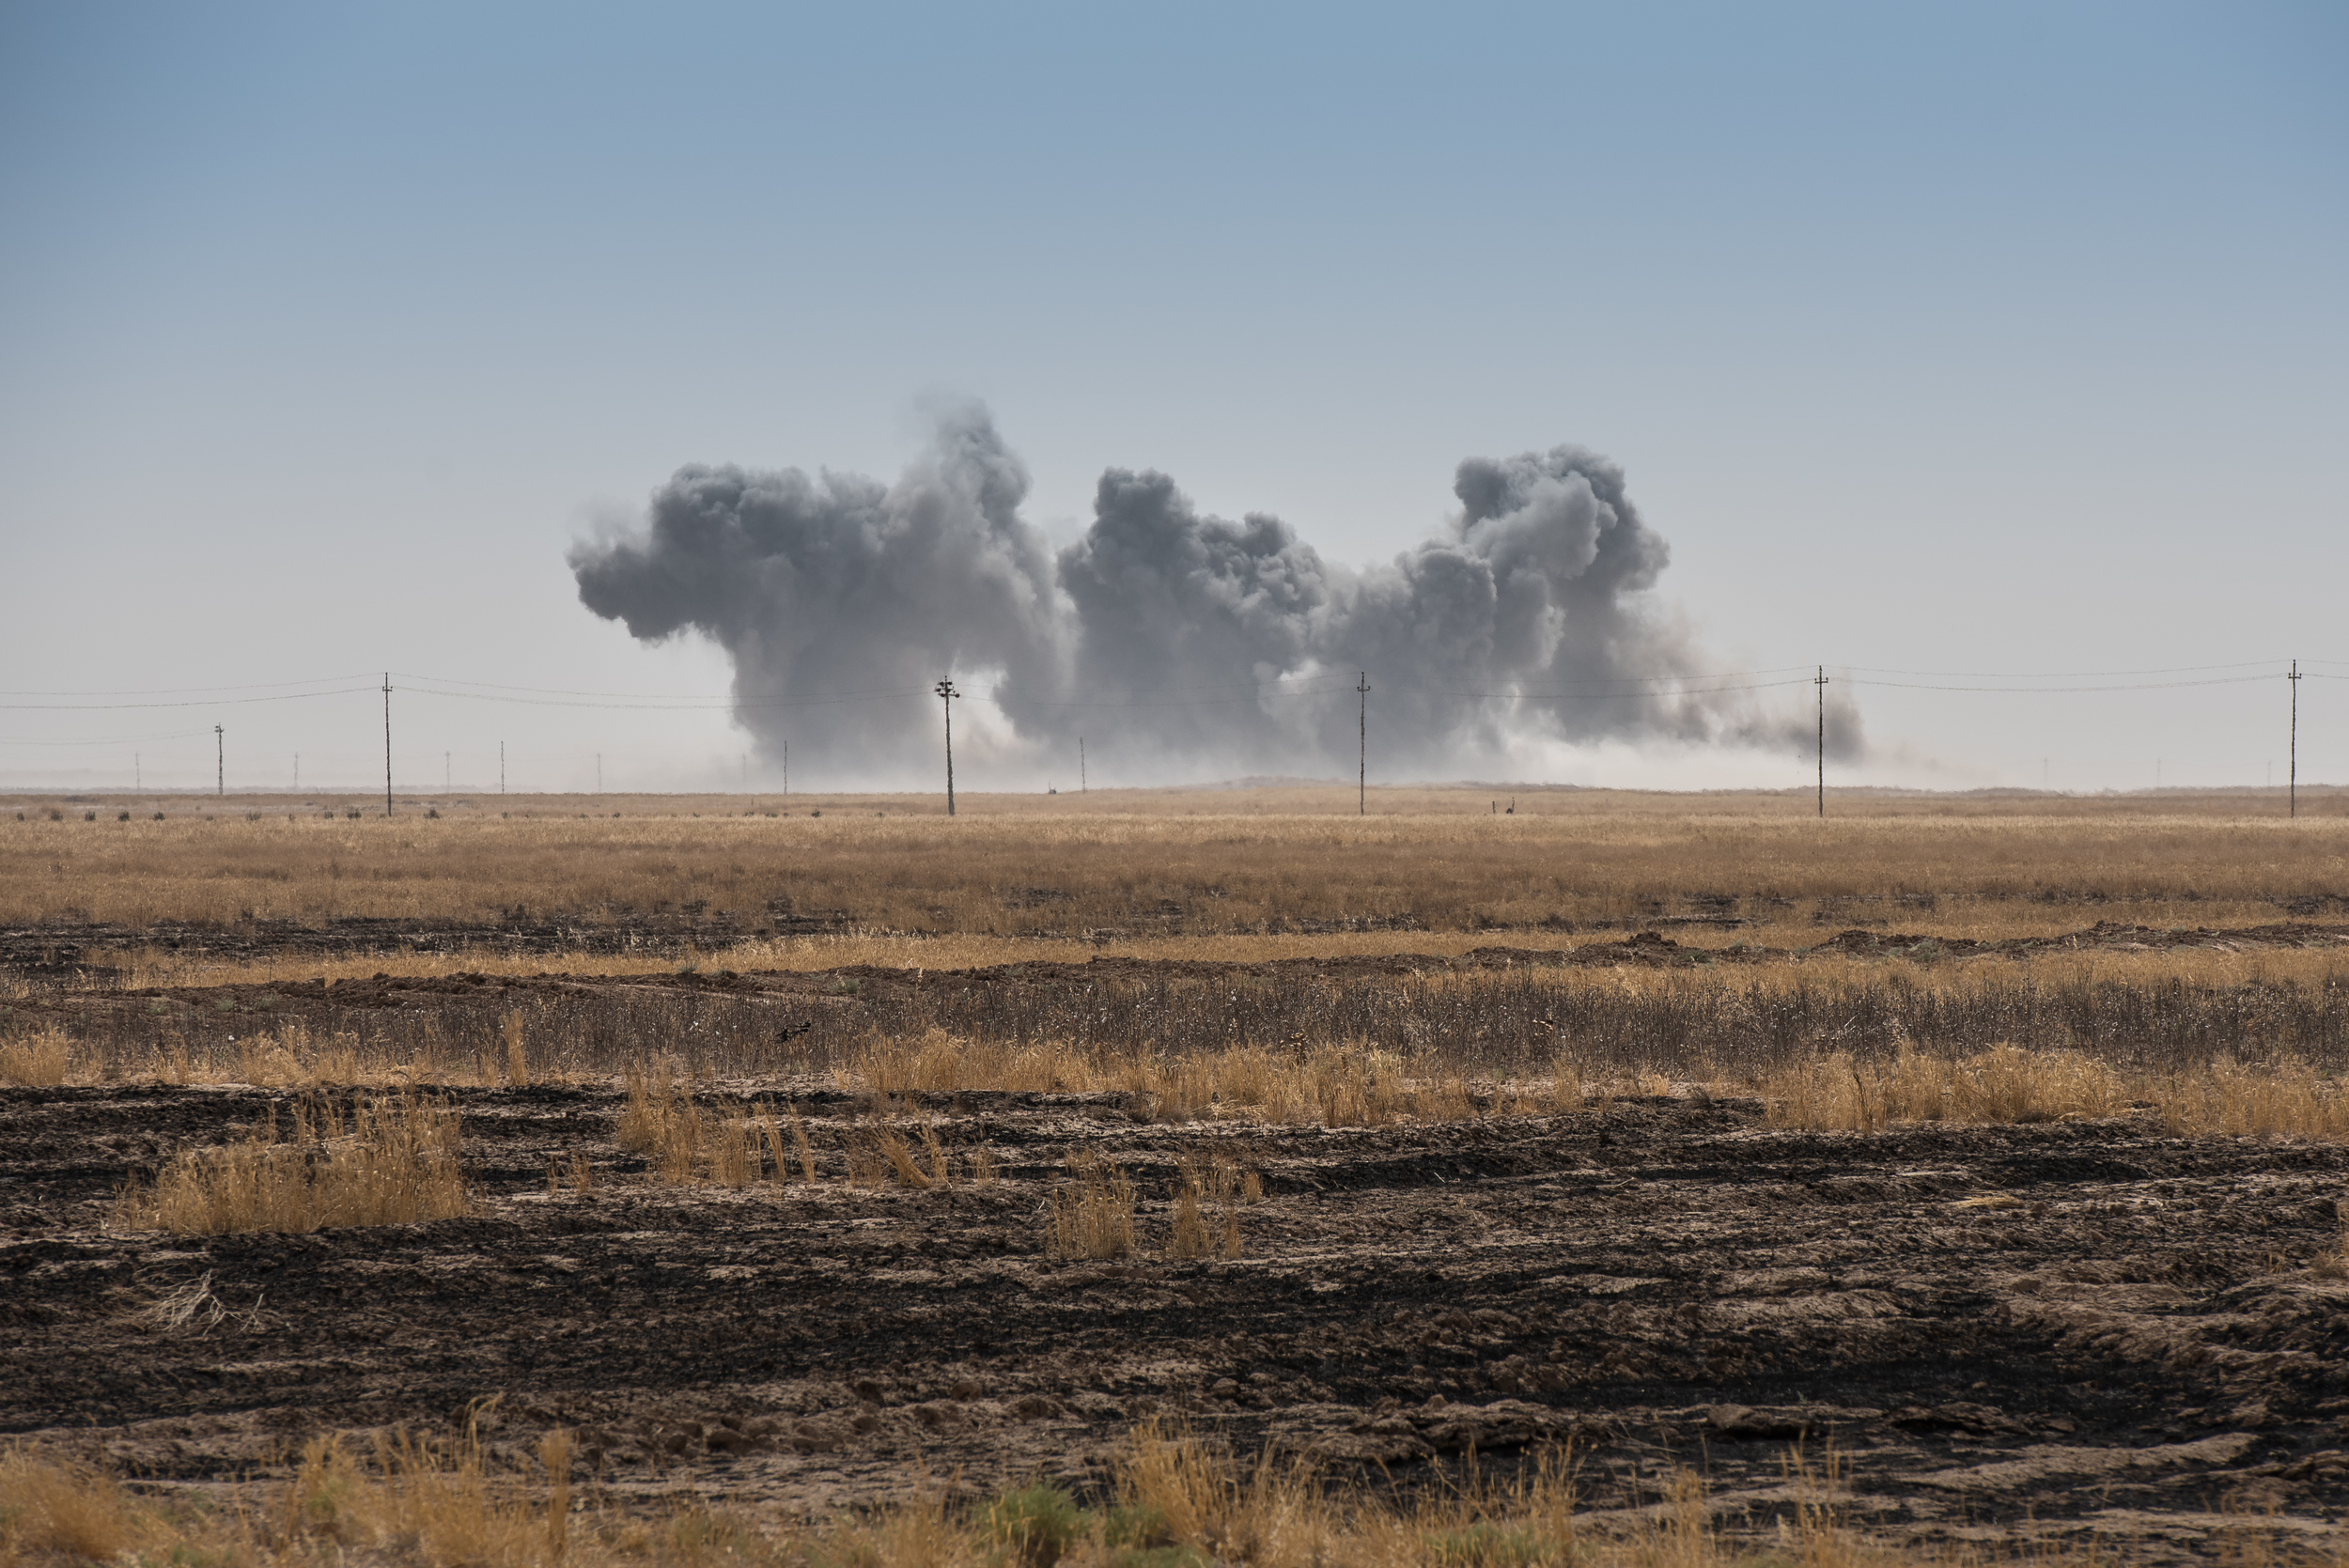  A coalition airstrike on a Islamic State (ISIS) position near the town of Makhmur (‏مەخموور) 